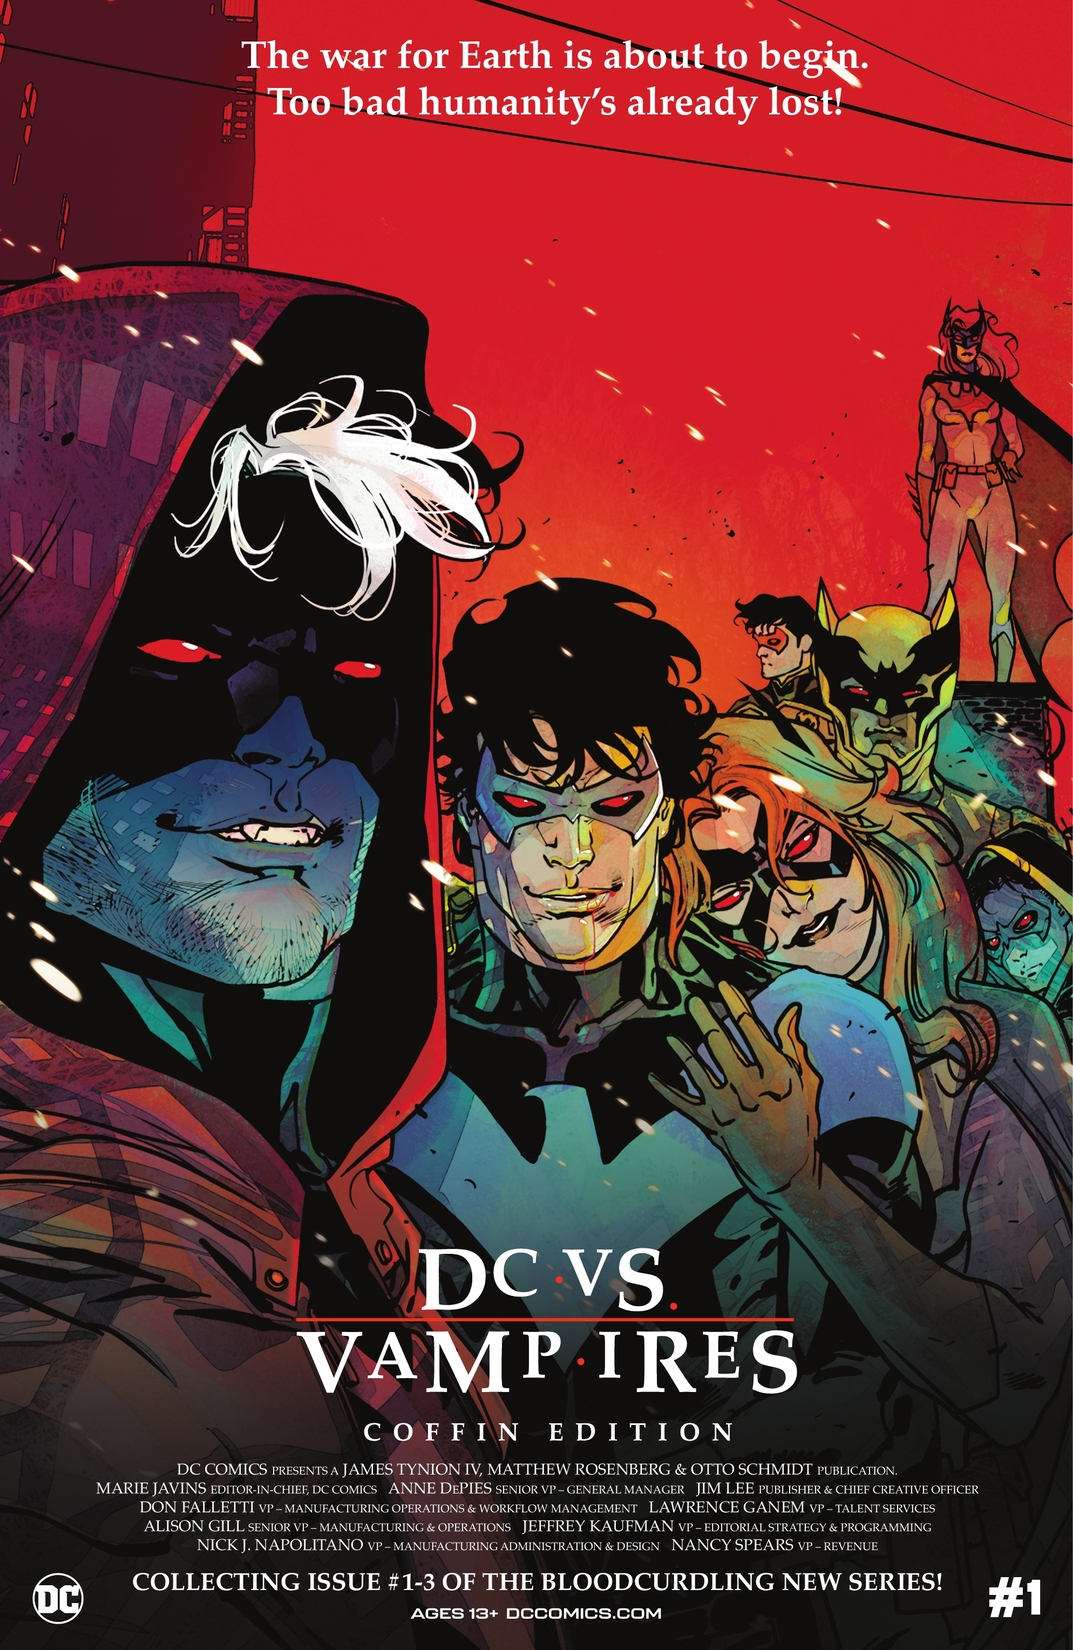 DC vs. Vampires - Coffin Edition #1 preview images